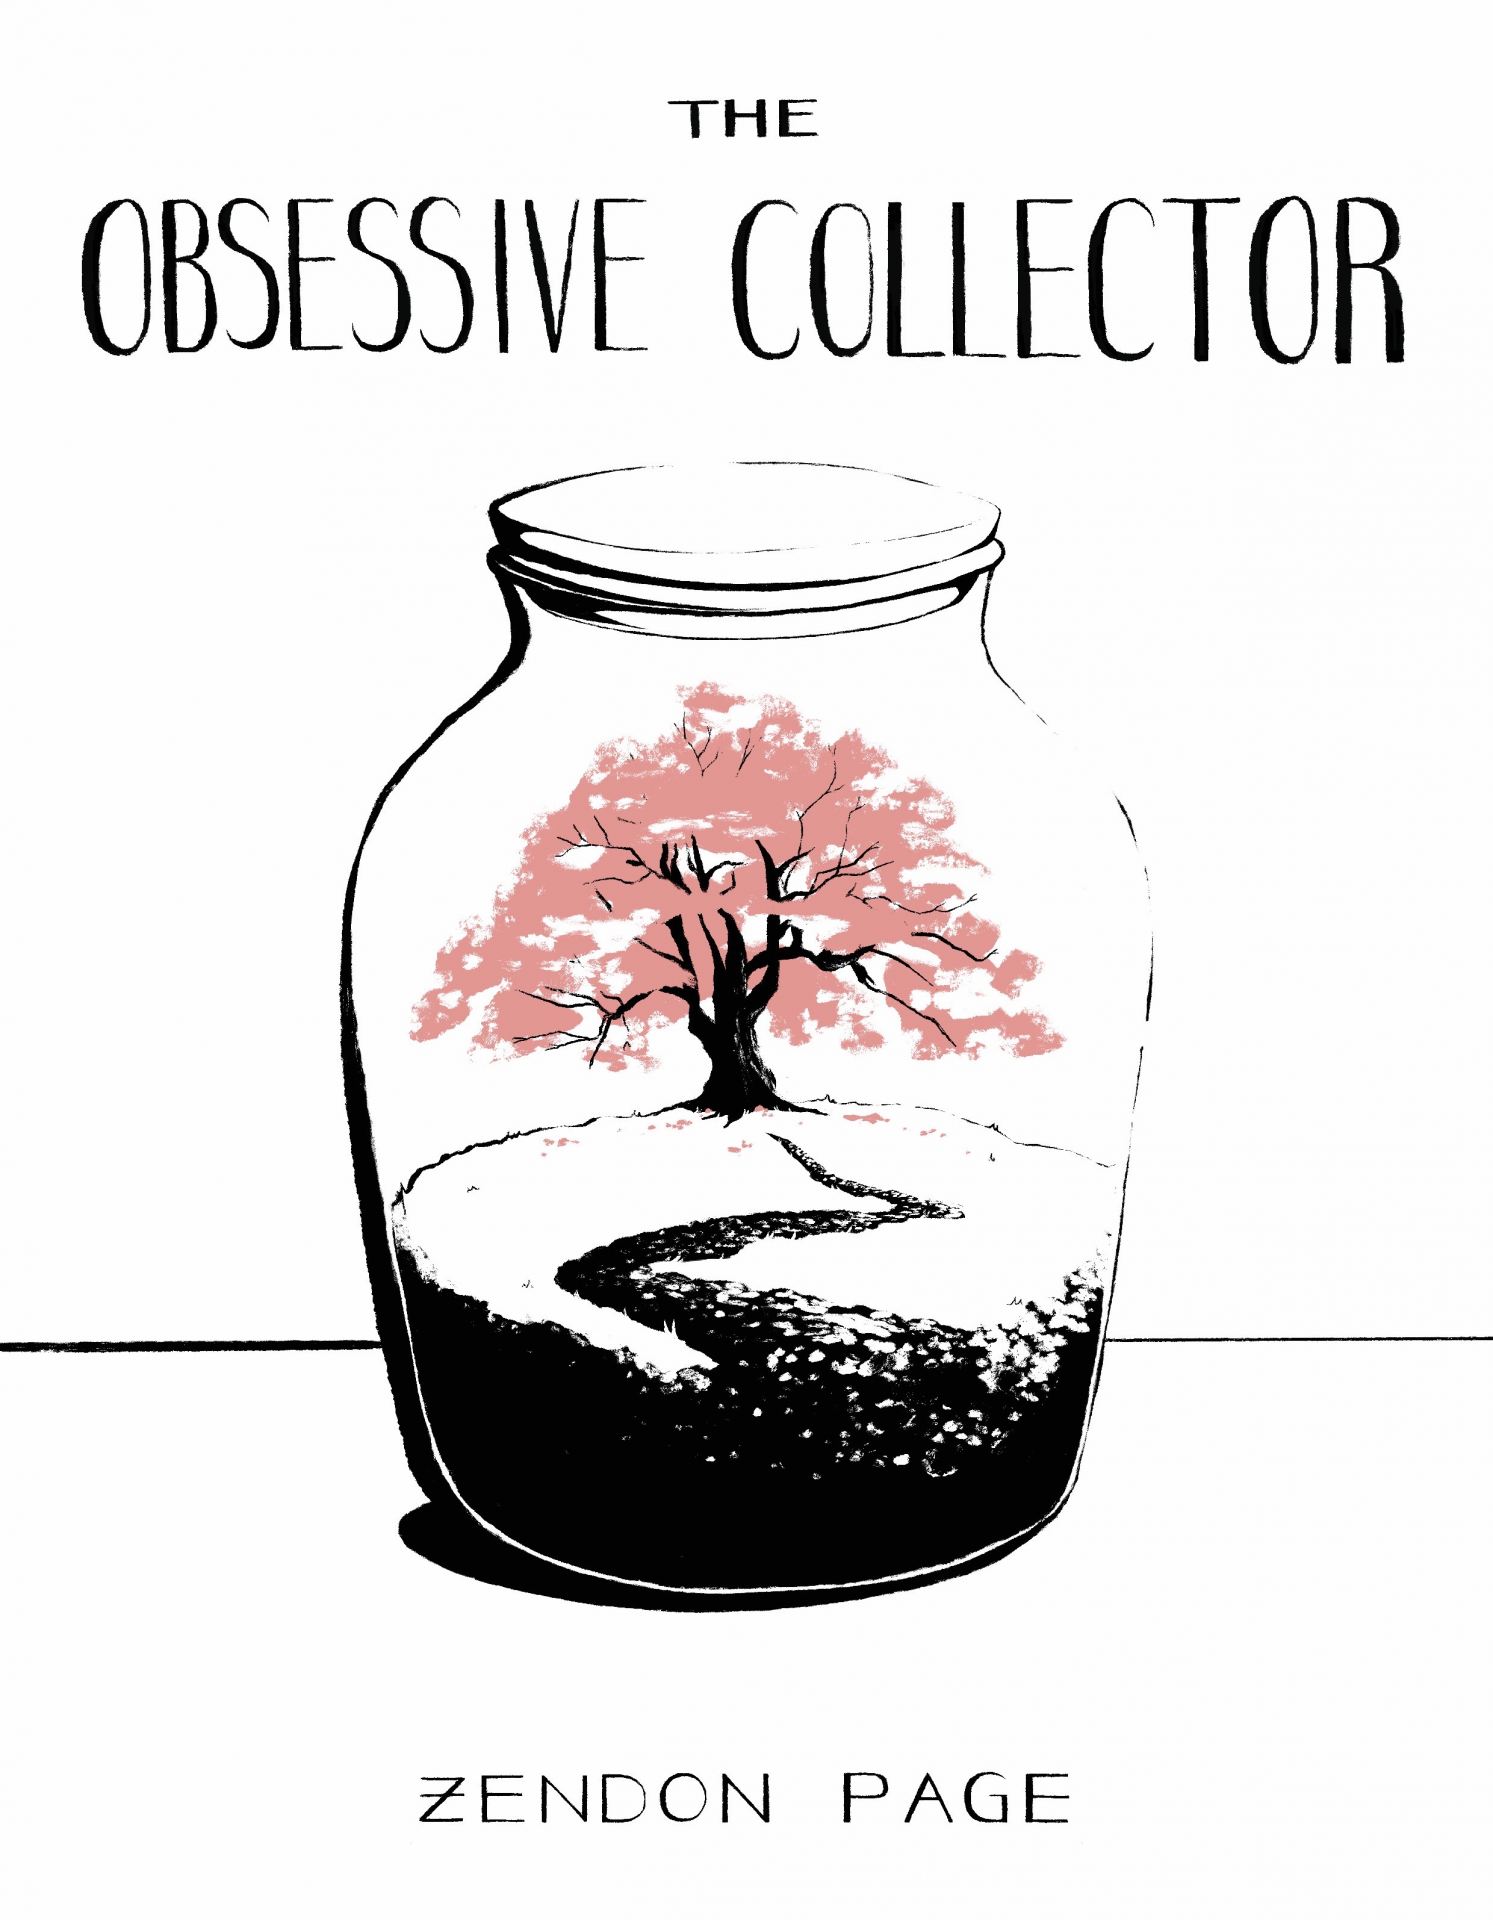 A graphic novel cover titled 'The Obsessive Collector'. There’s a drawing of a glass bottle, inside is a cherry blossom tree on a mound with a path leading up to it. The drawing is pink and black.